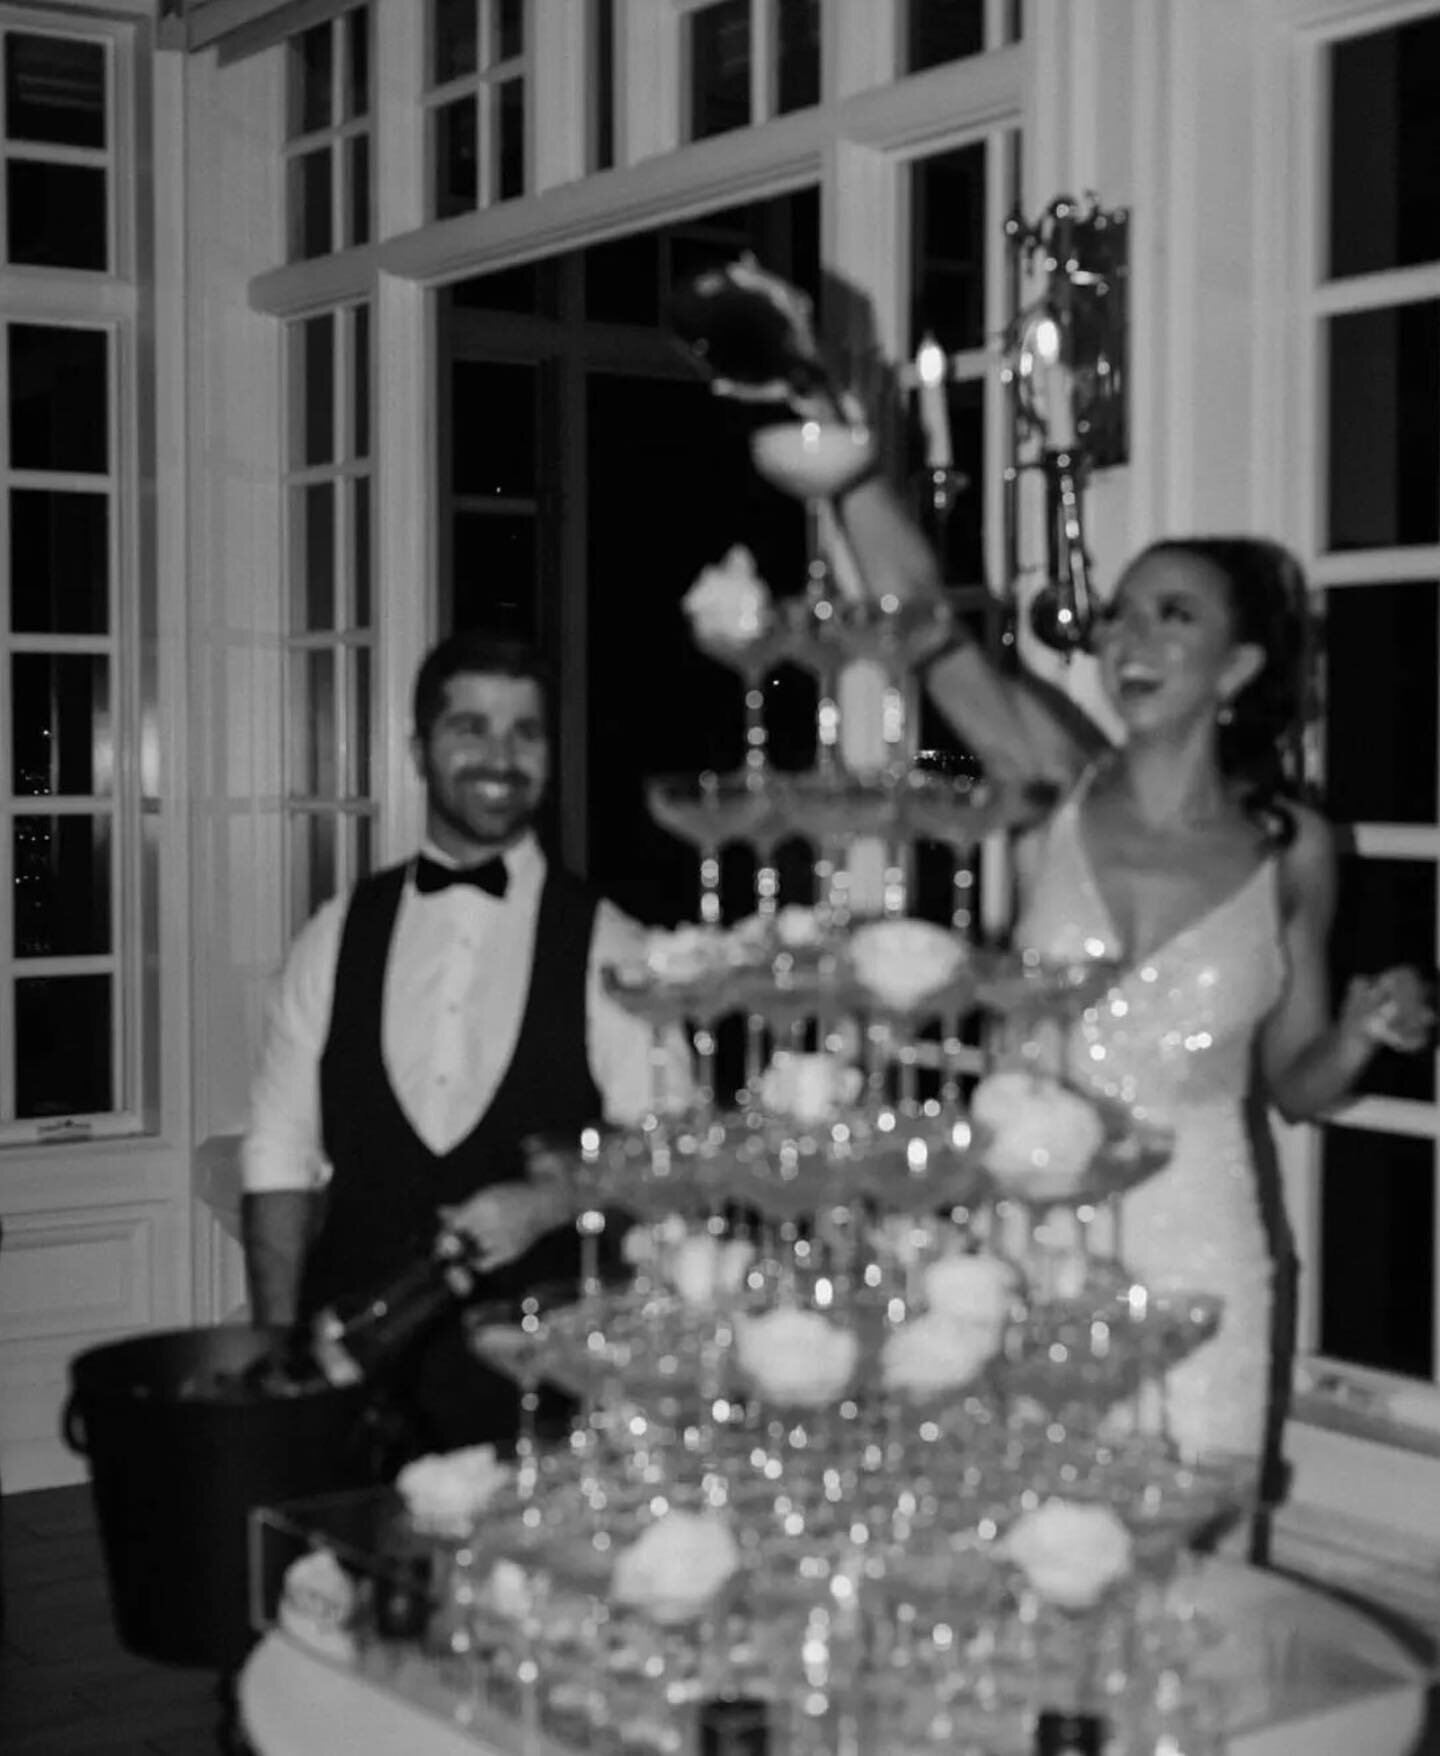 Meet me at midnight 🥂
.
.
.
 
Photography by @nicoleivanovphoto 
.
.
.

#NYE #2023bride #2023wedding #champagnetower #champagnelover